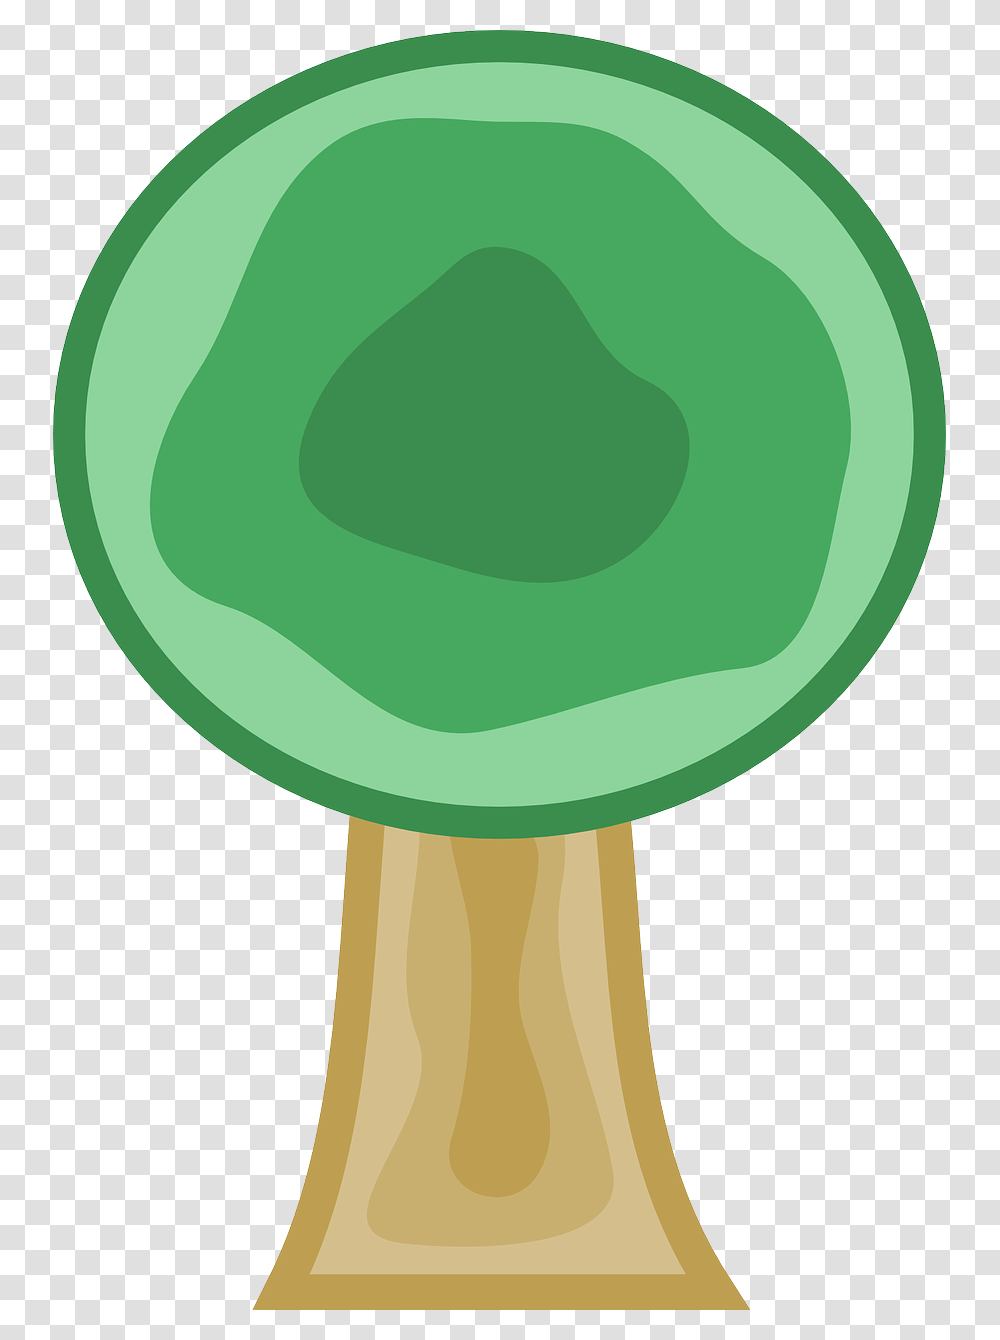 Simple Tree Natural Environment To Draw, Plant, Rattle, Agaric, Mushroom Transparent Png